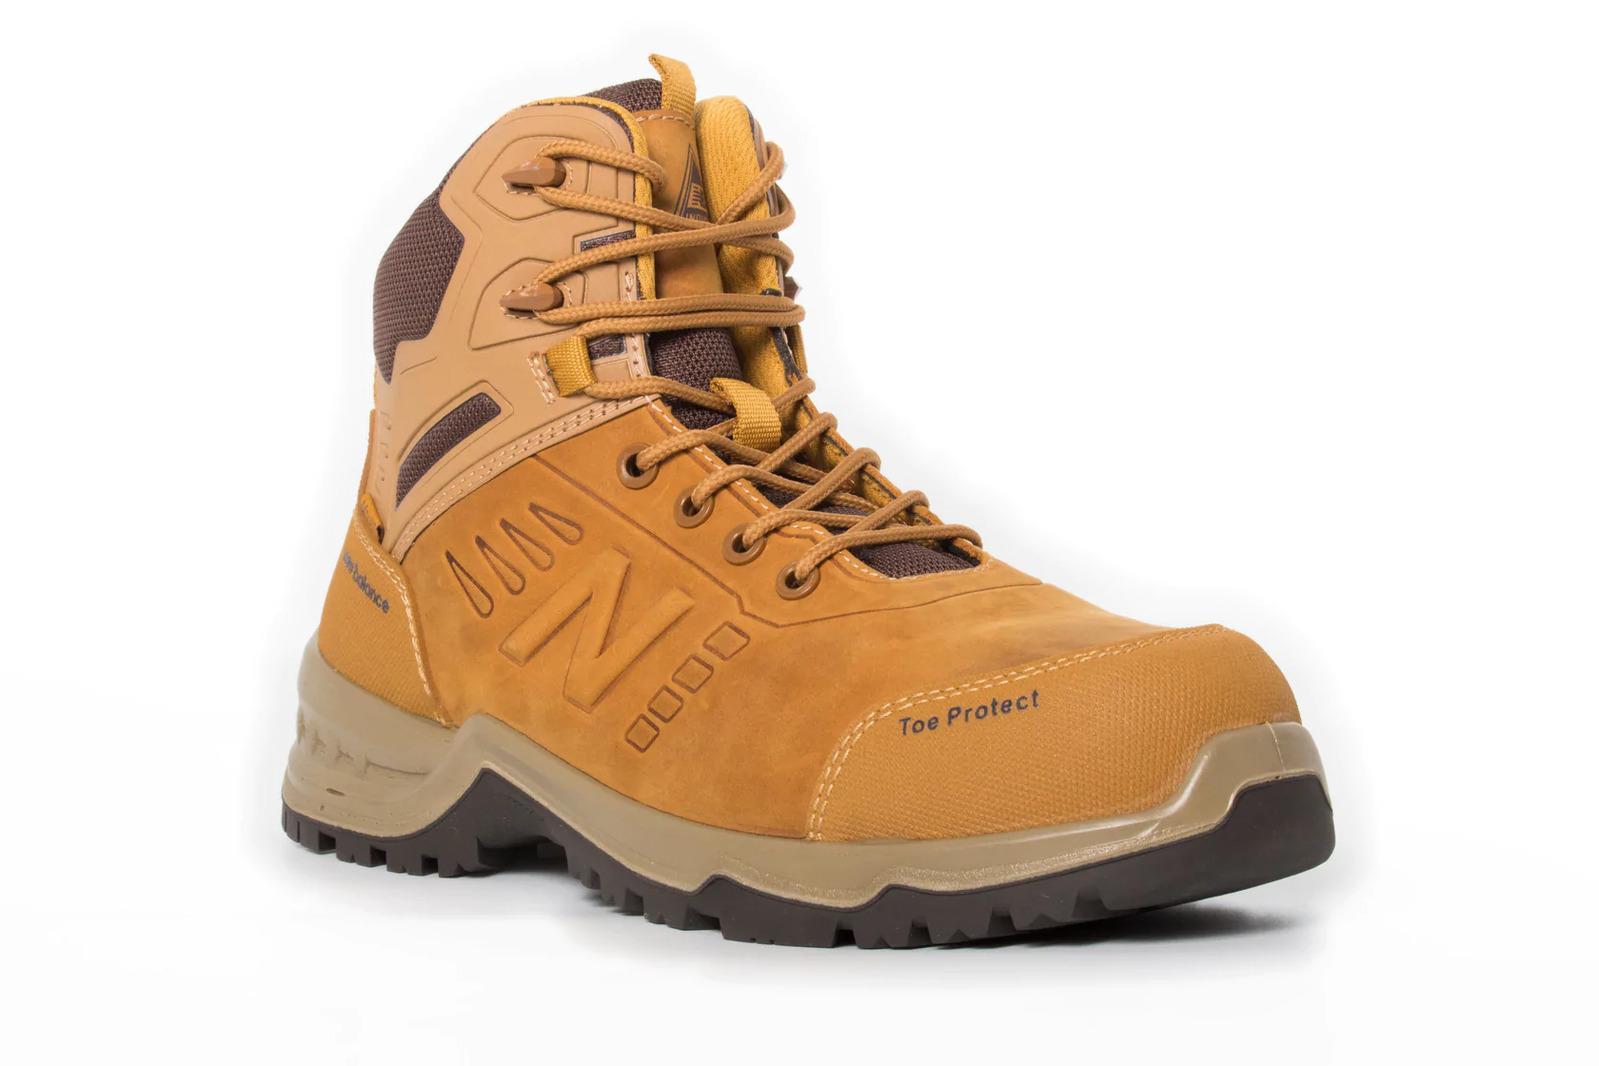 New Balance Mens Contour Steel Toe Cap Safety Work Boots with Zip - Wheat - US 9 Width:4E